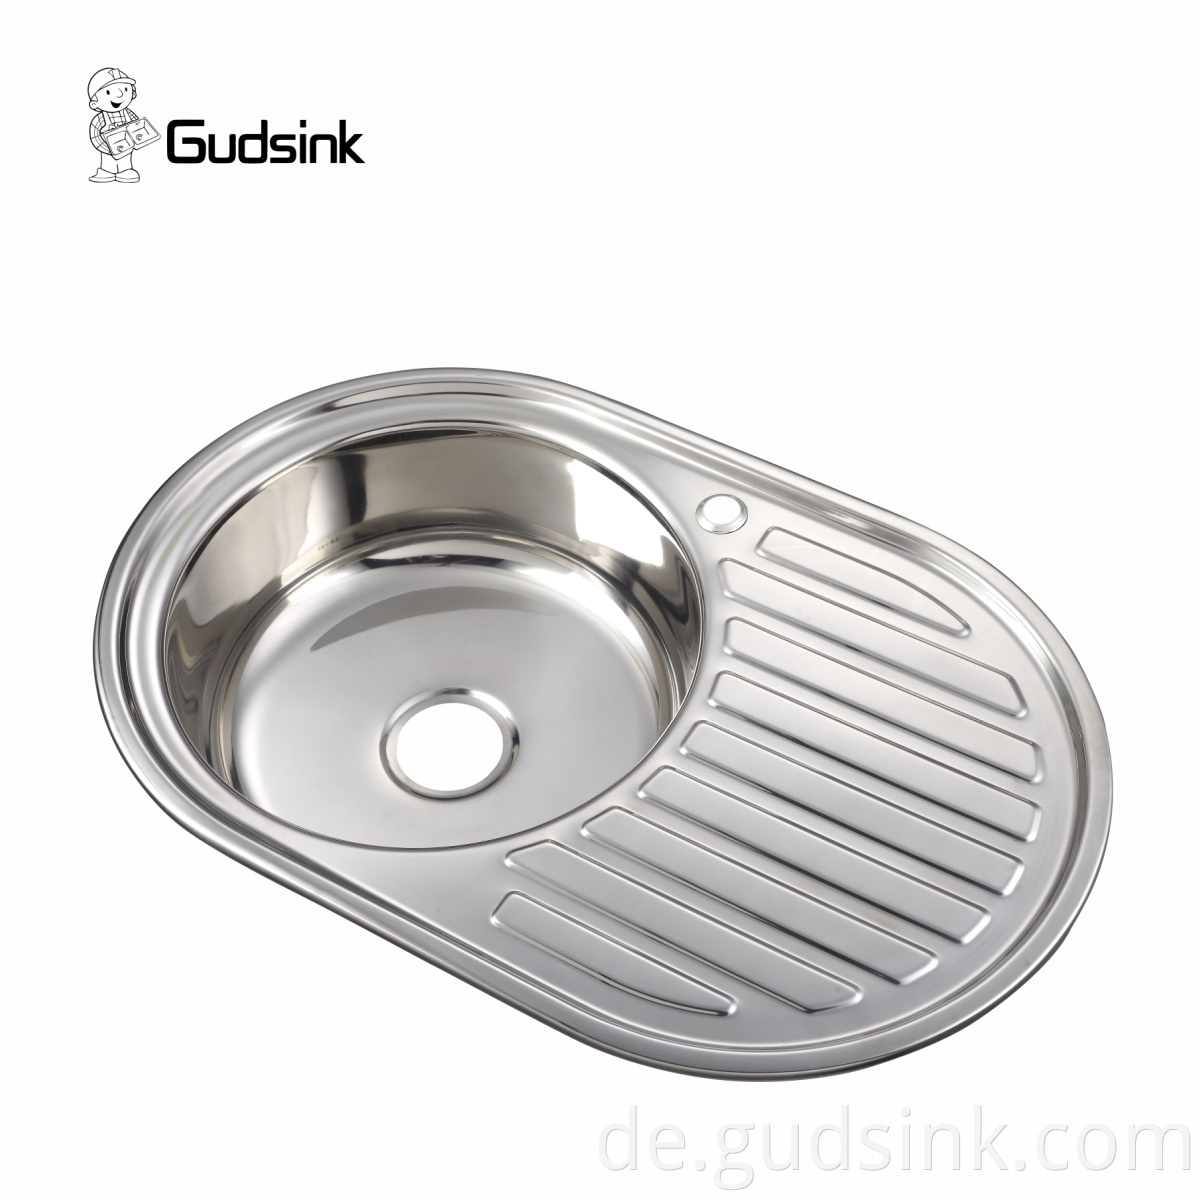 wall mount stainless steel sink